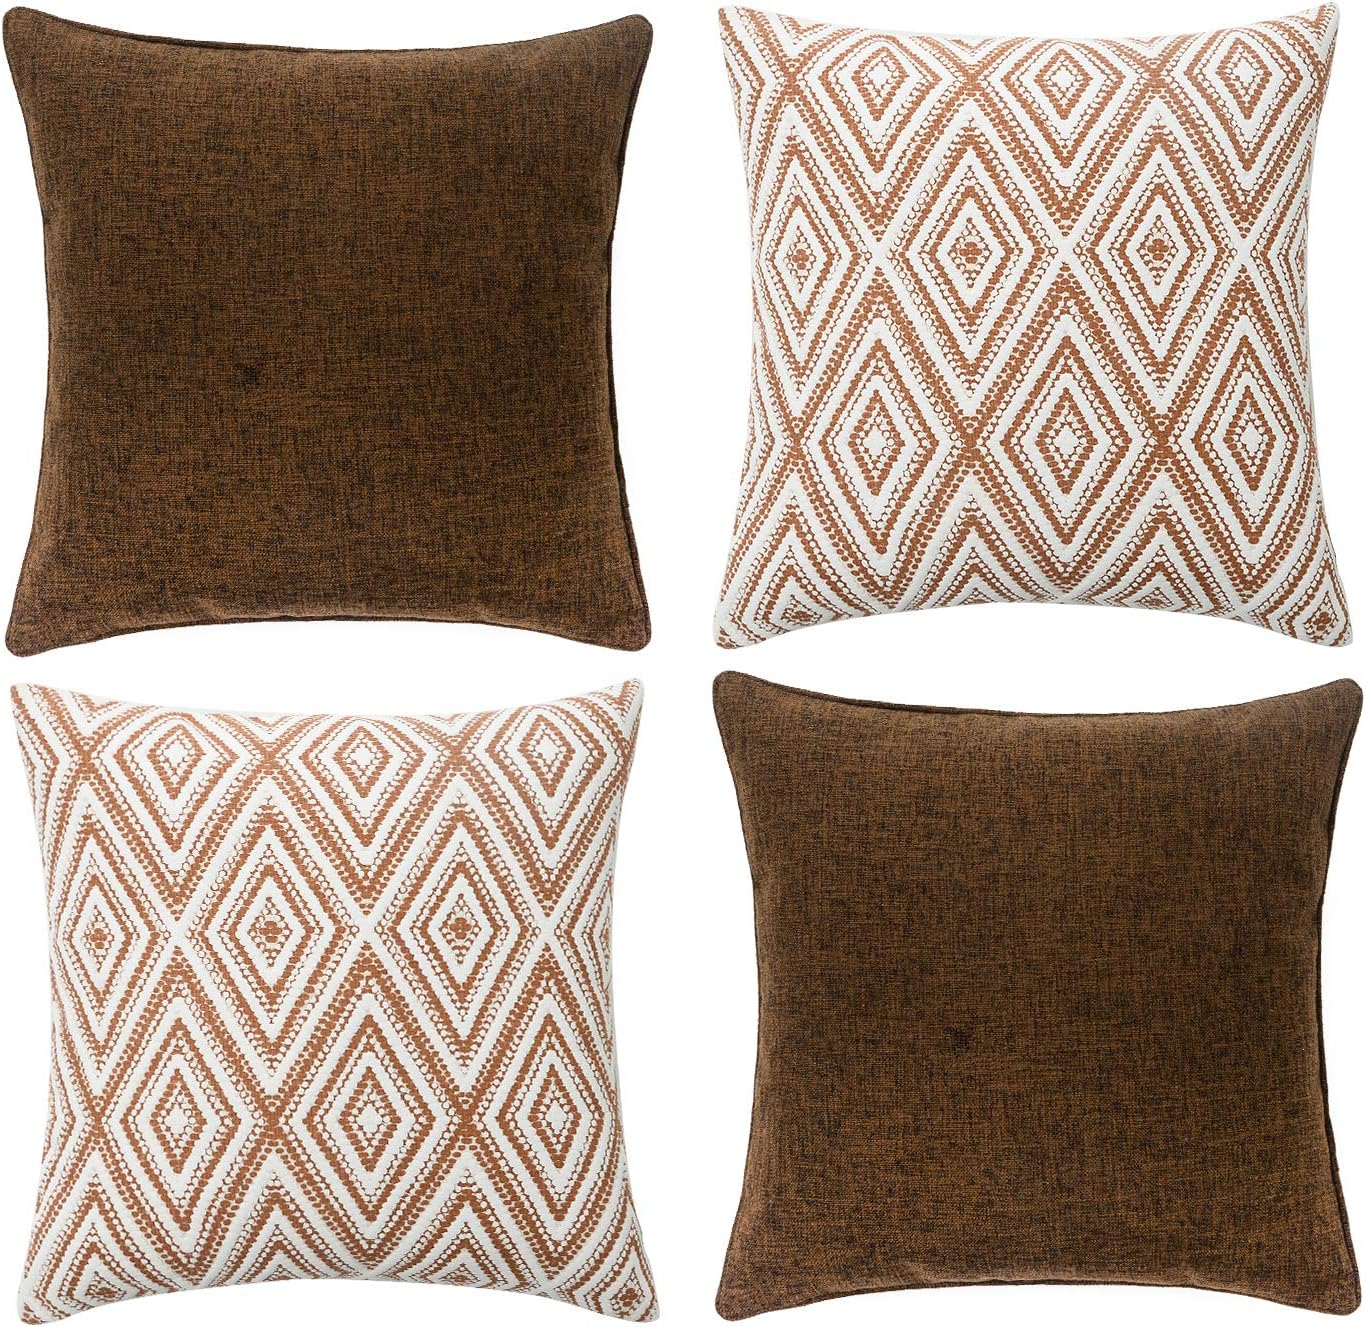 HPUK Decorative Throw Pillow Covers Set of 4 Geometric Design Linen Cushion Cover for Couch Sofa Living Room, 18x18 inches, Chocolate